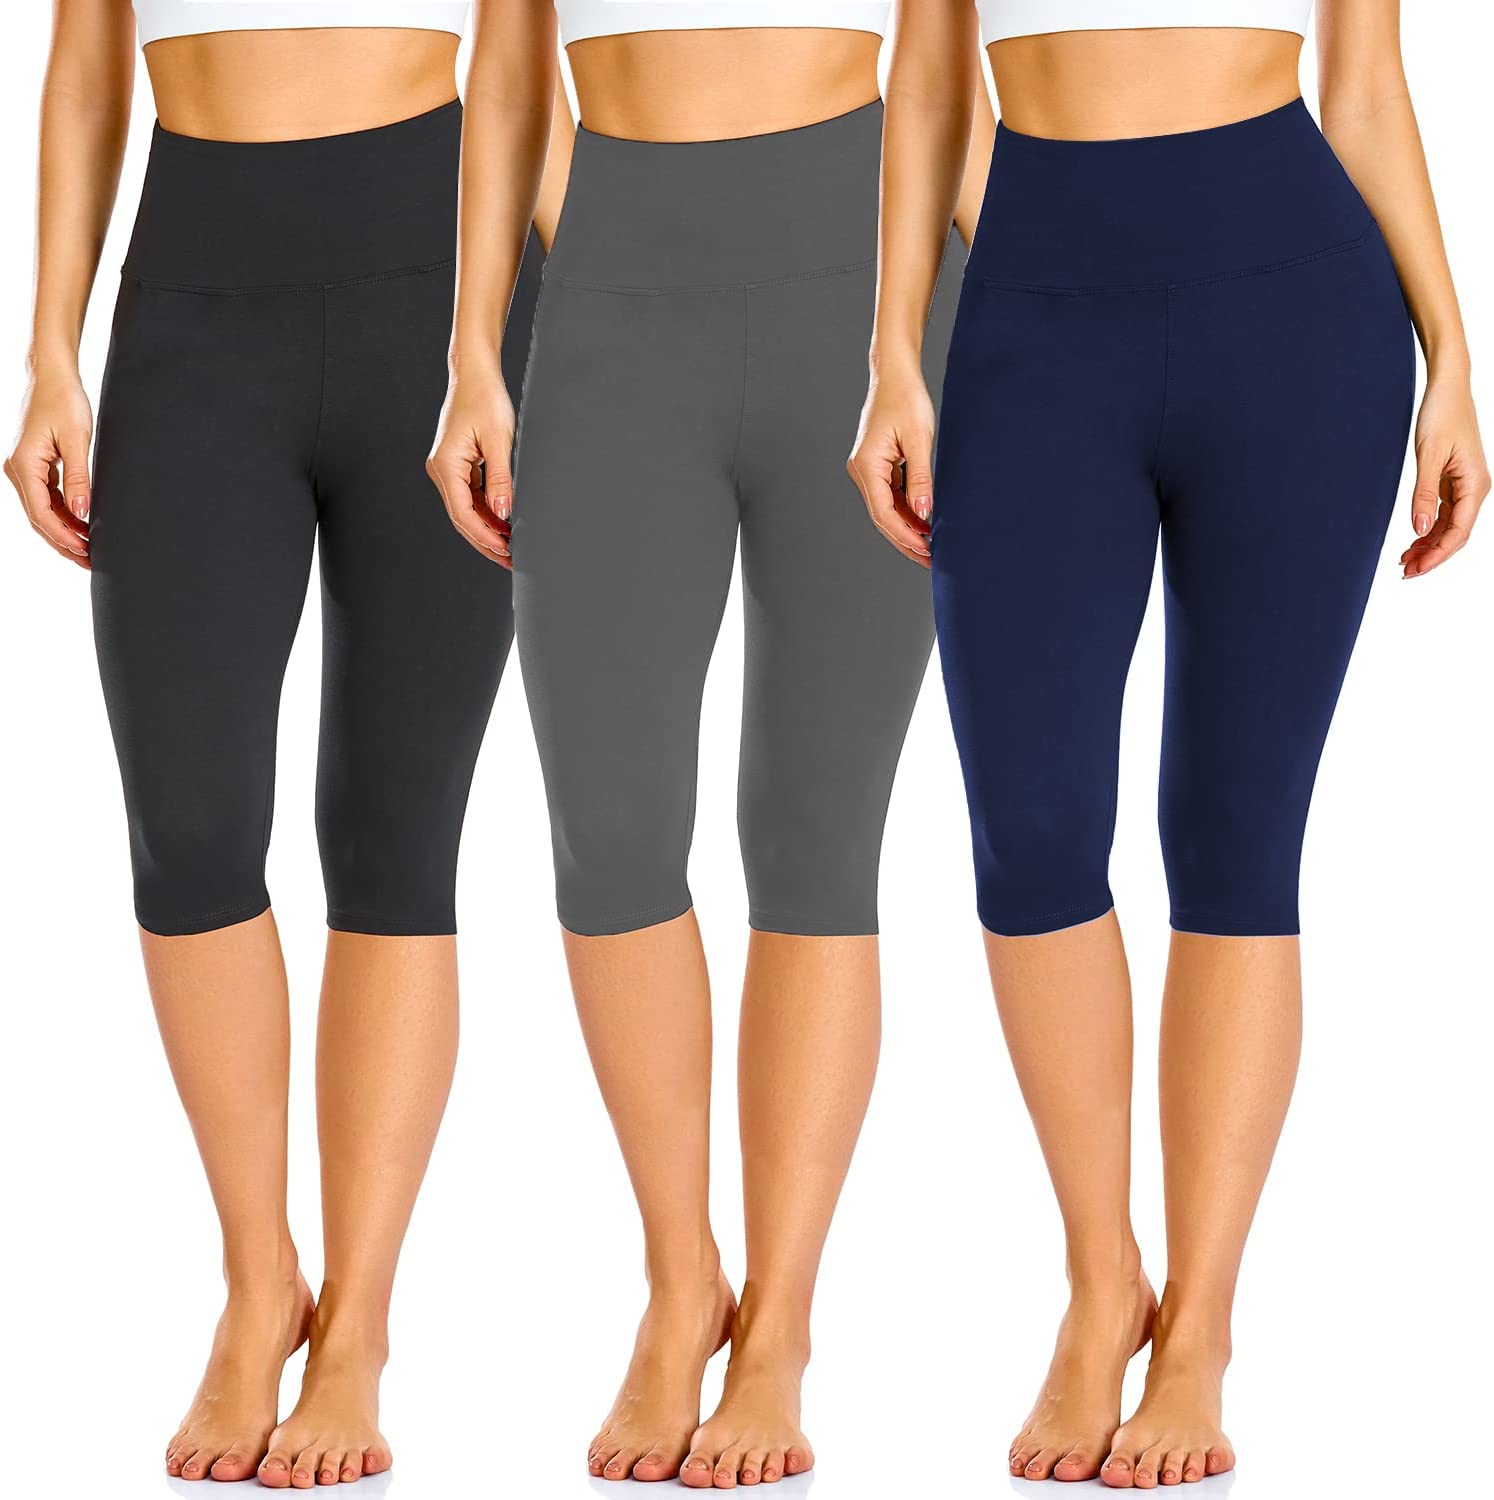 3 Pack Leggings for Women Non see through-Workout High Waisted